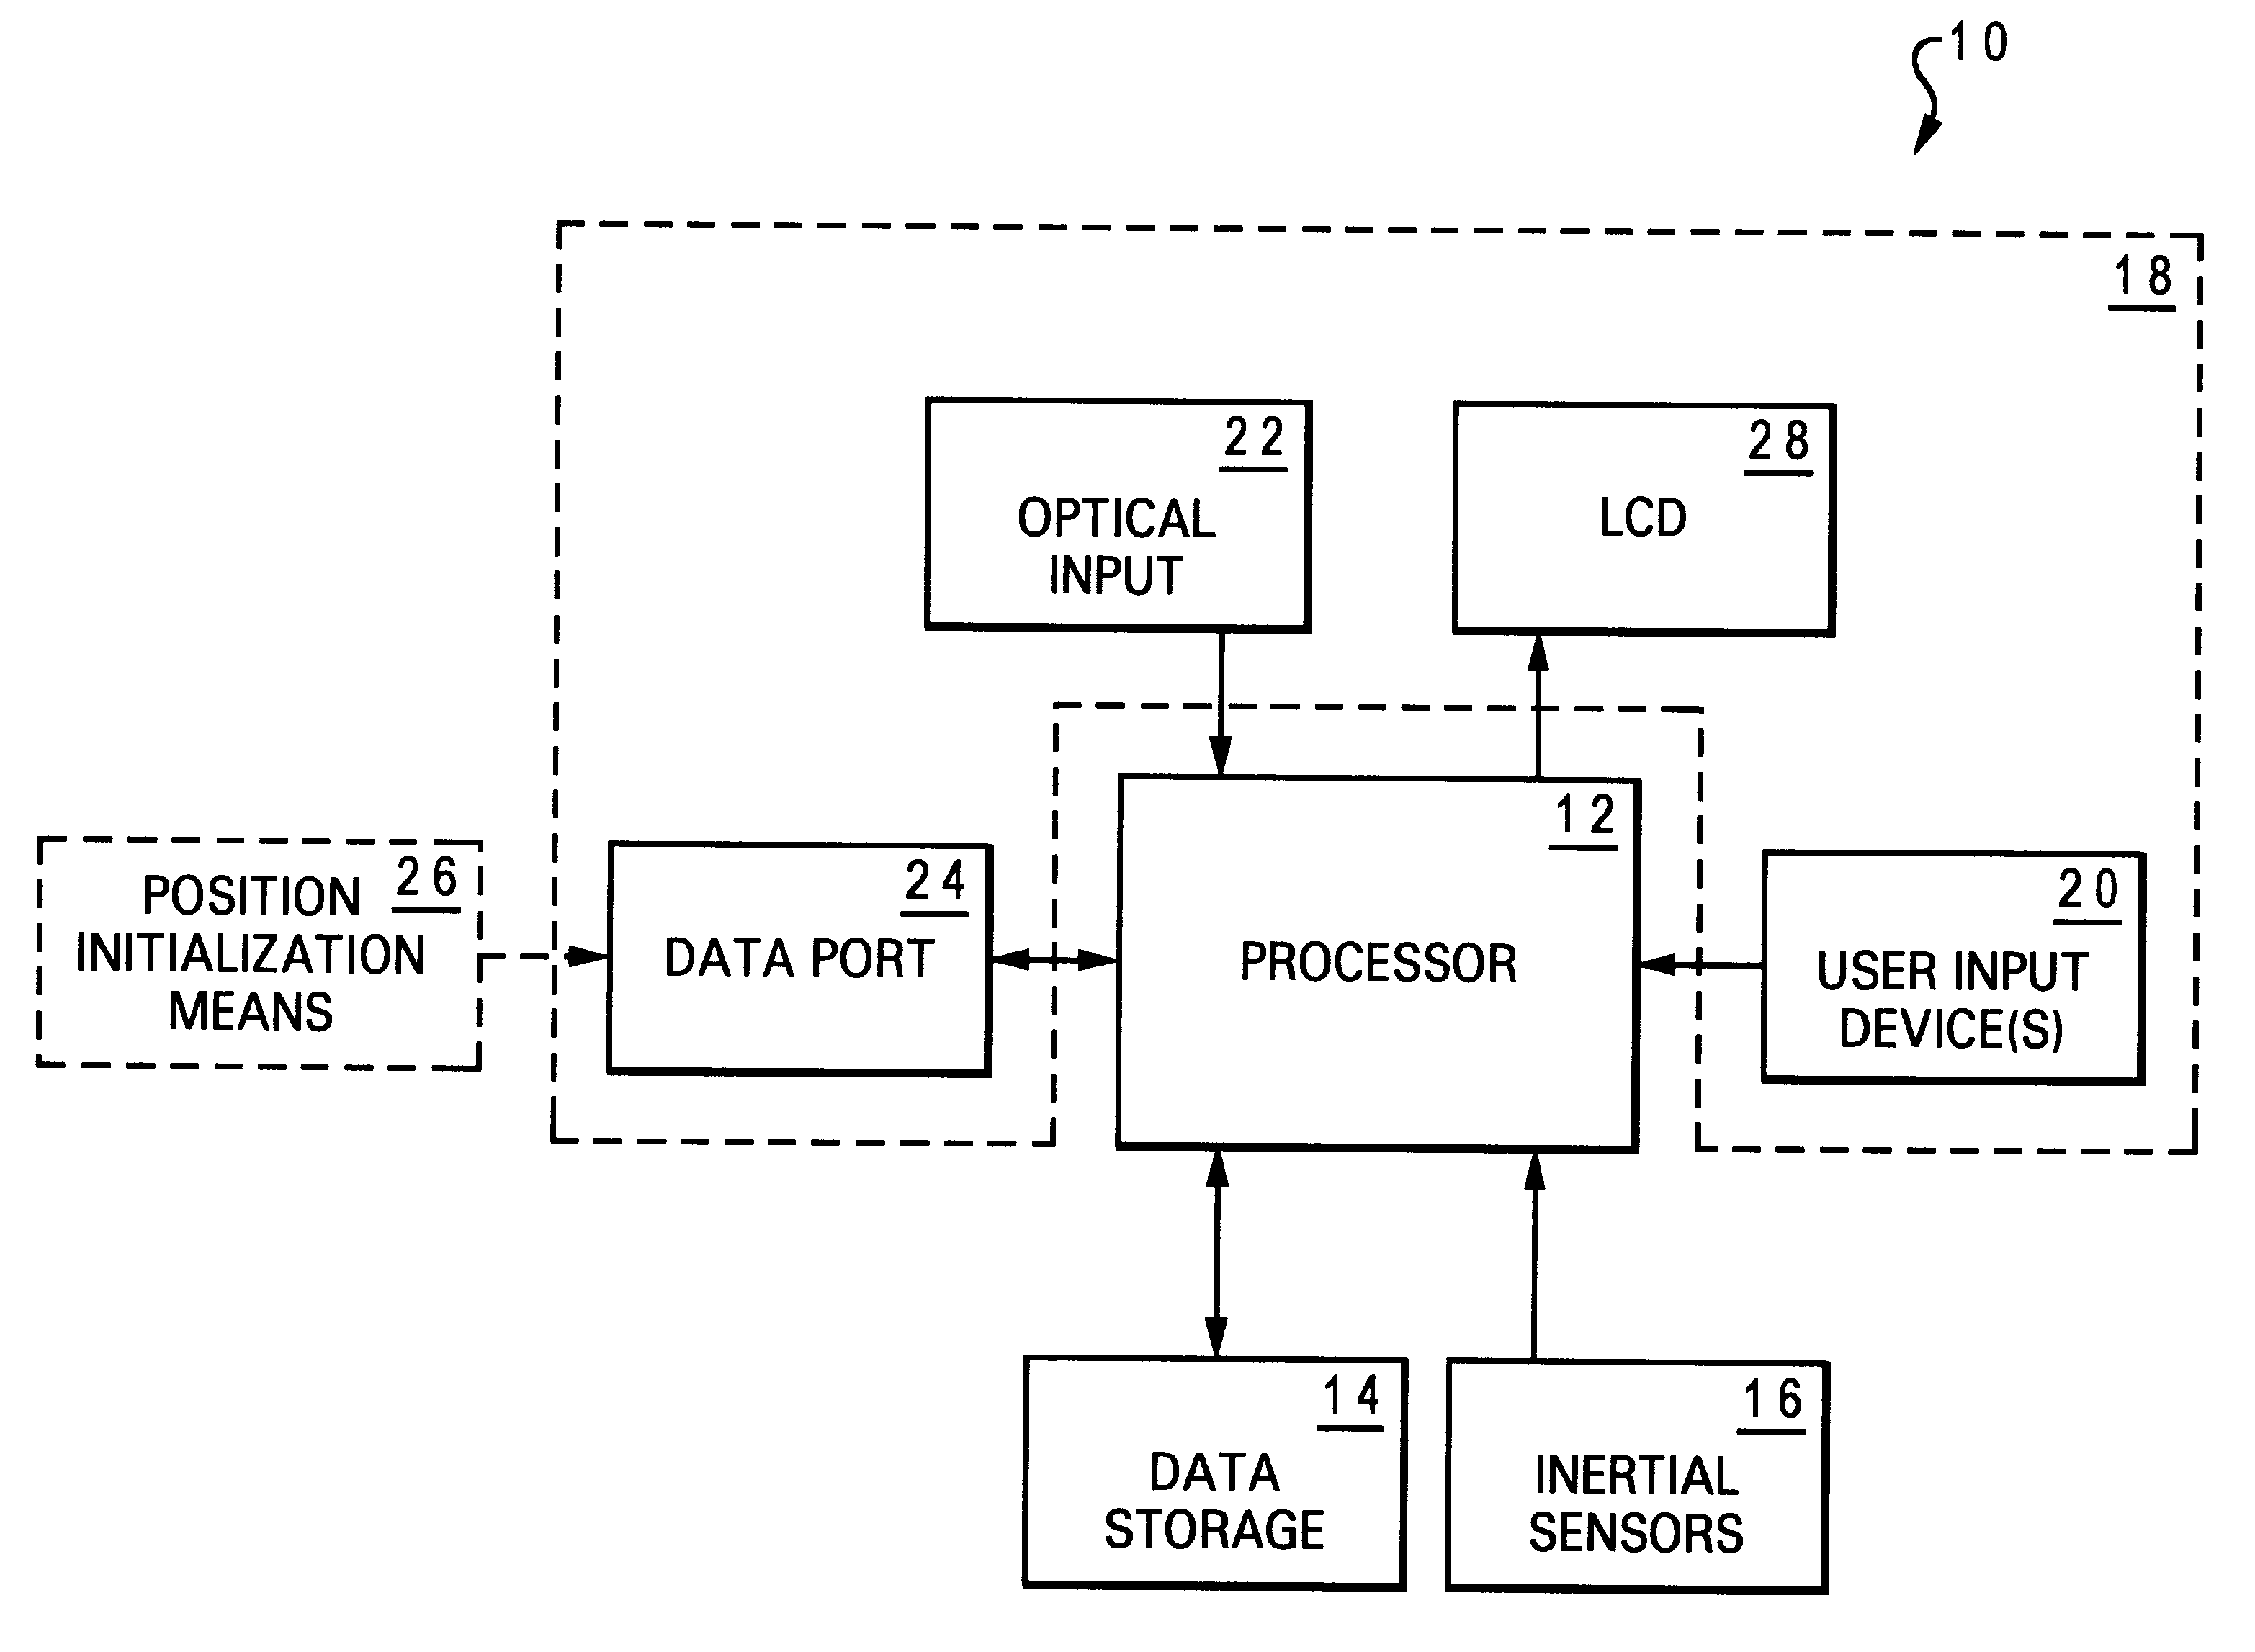 Method and system for determining position information utilizing a portable electronic device lacking global positioning system (GPS) satellite reception capability